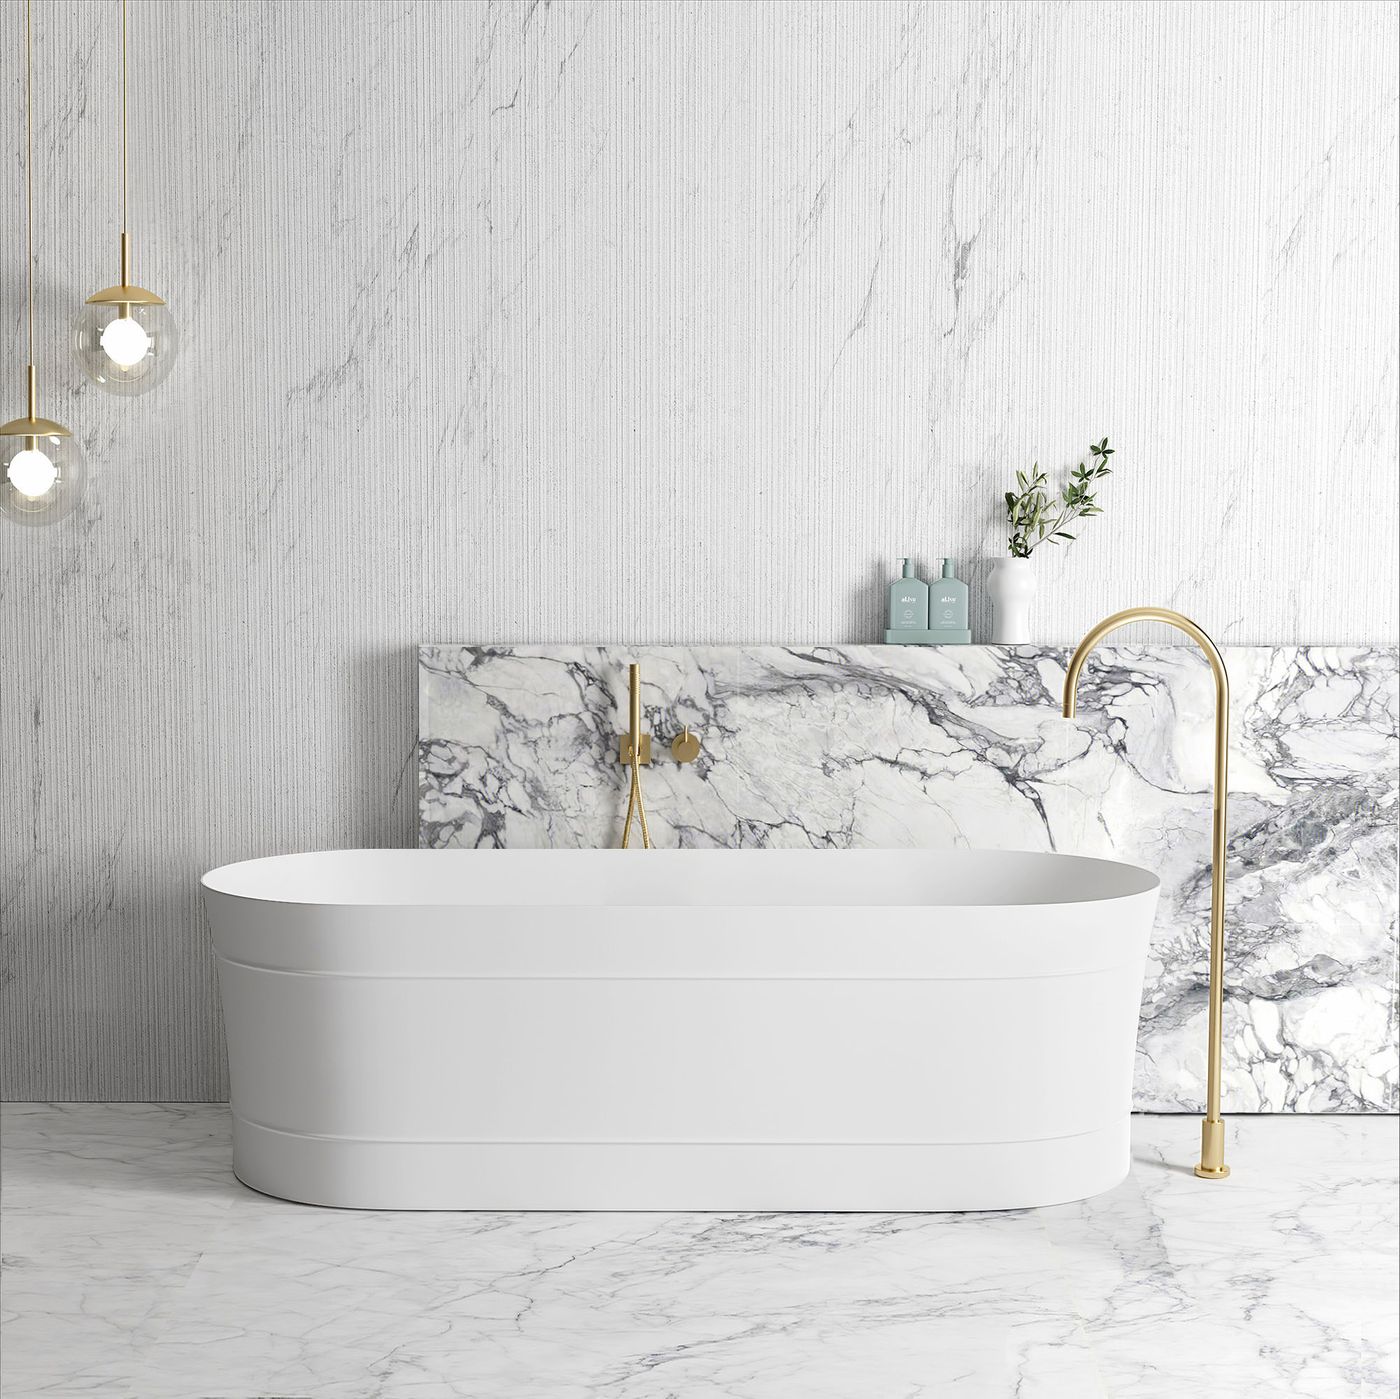 ATTICA BONDI FREE STANDING BATHTUB GLOSS WHITE (AVAILABLE IN 1500MM AND 1700MM)